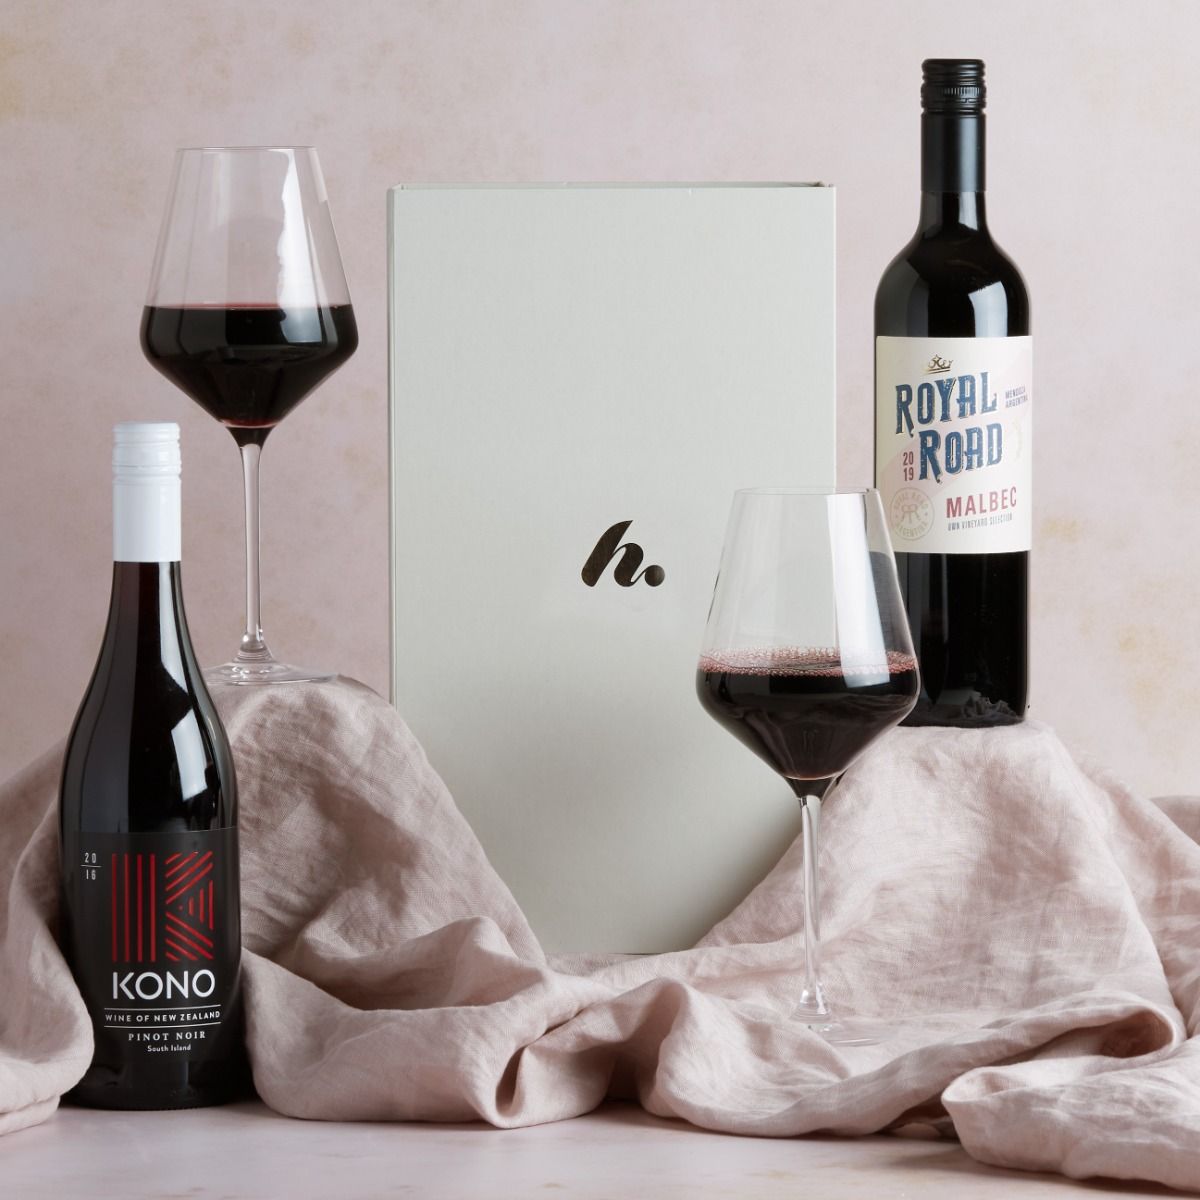 The Red Wine Duo Gift Box with wine and glasses of wine on display with signature gift box